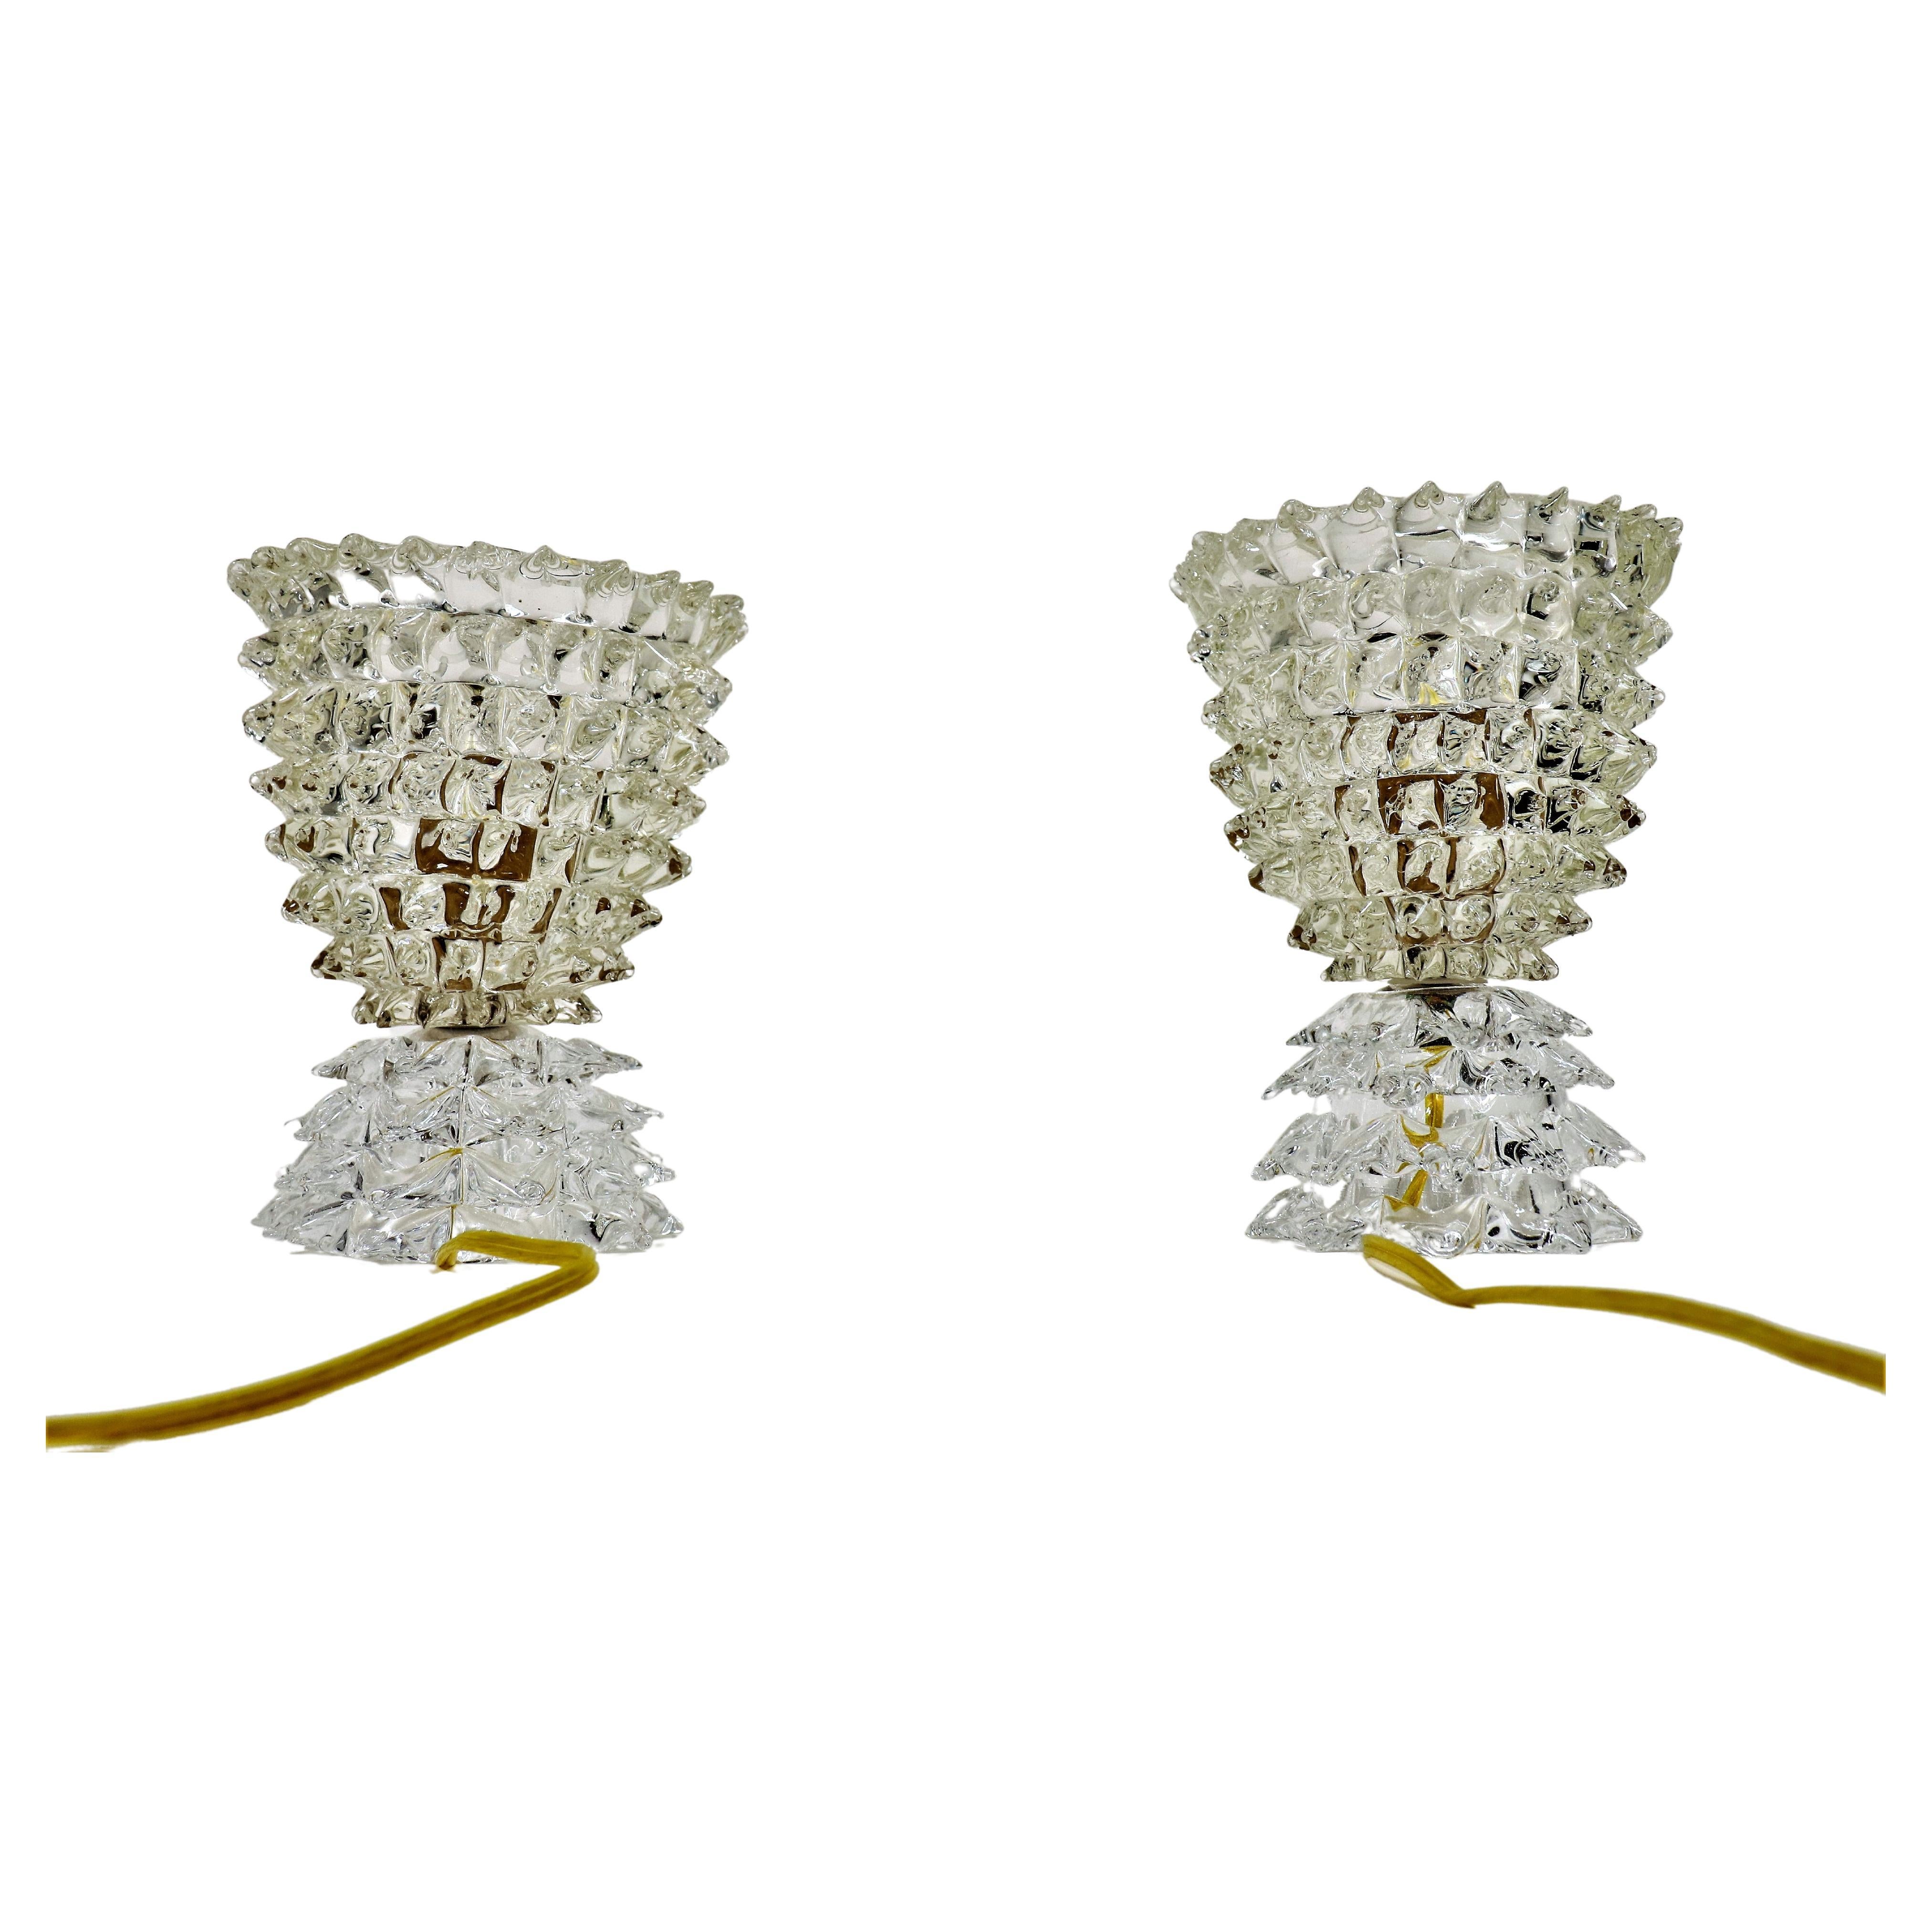 Pair of Vintage Murano Glass Rostrato Lamps in the Manner of Ercole Barovier